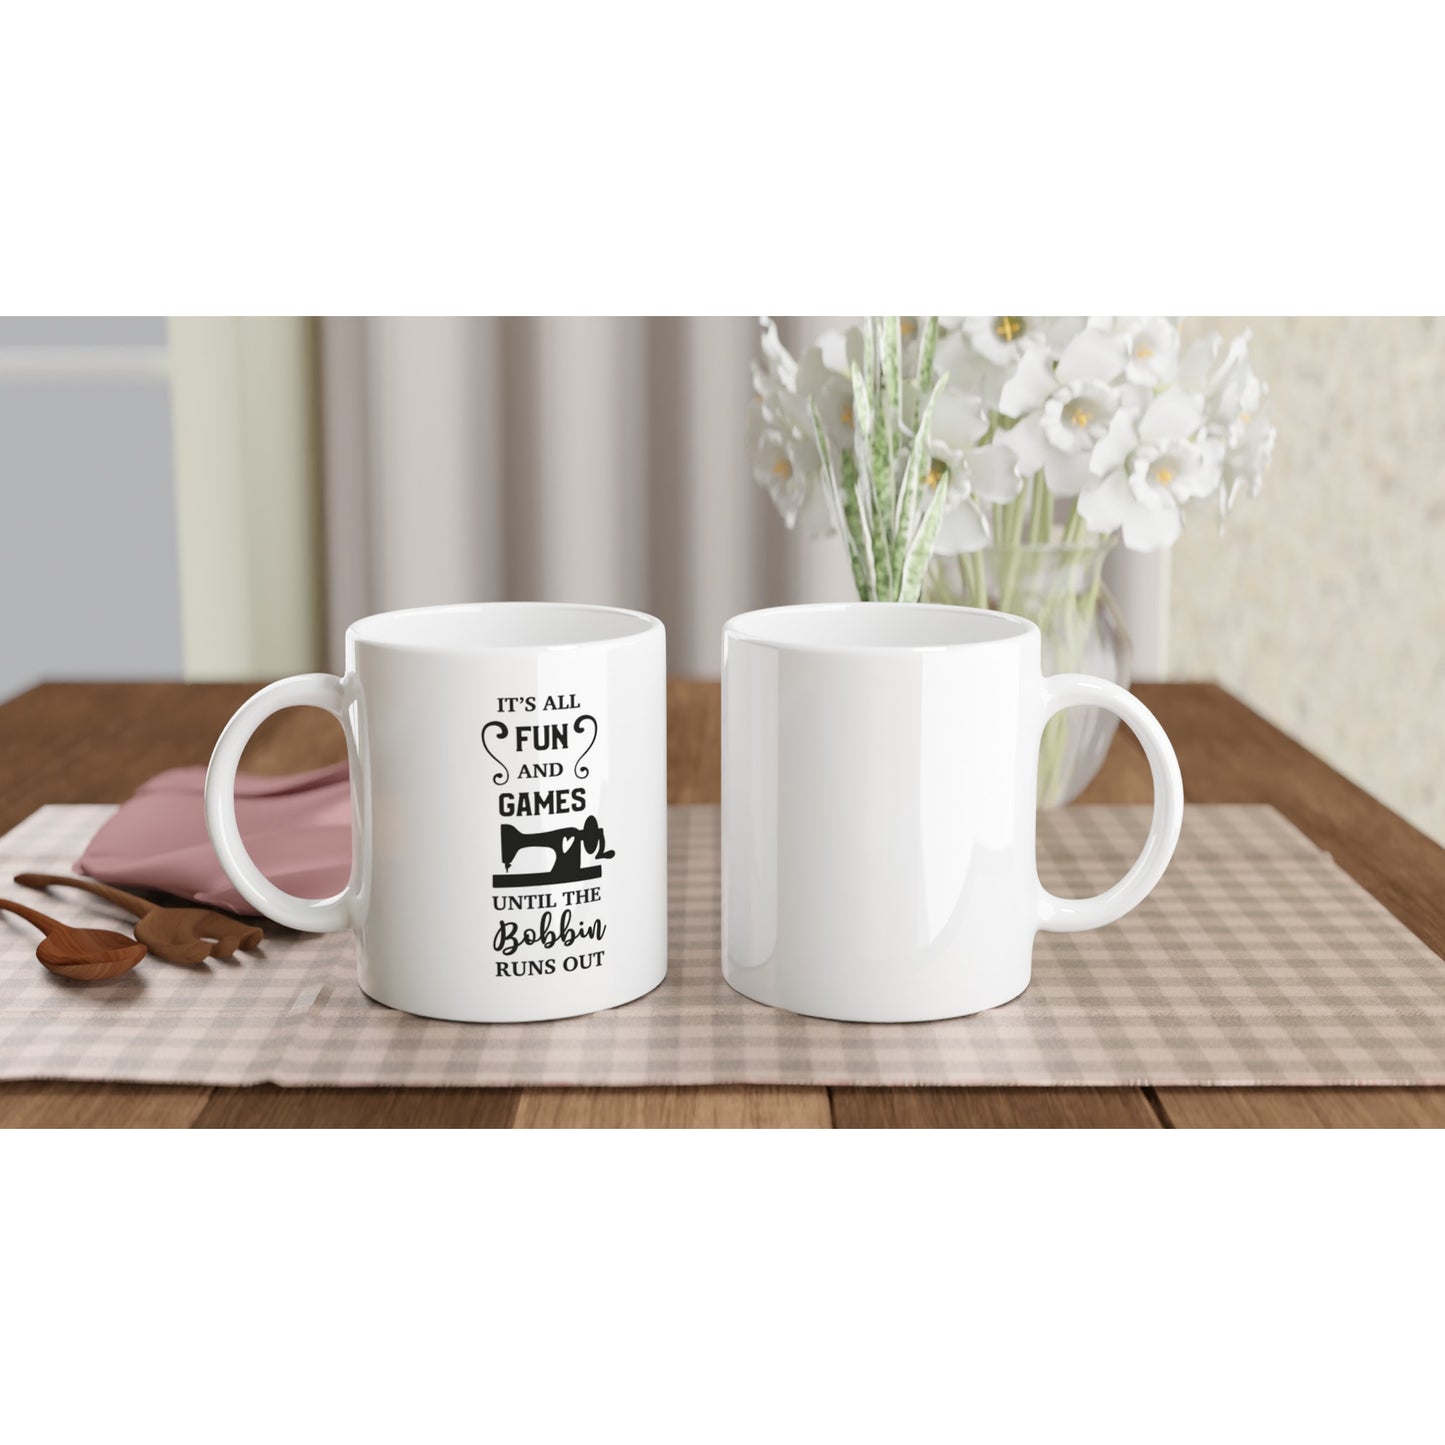 It's All Fun and Games Until the Bobbin Runs Out - Quilters Gift - White 11oz Ceramic Mug